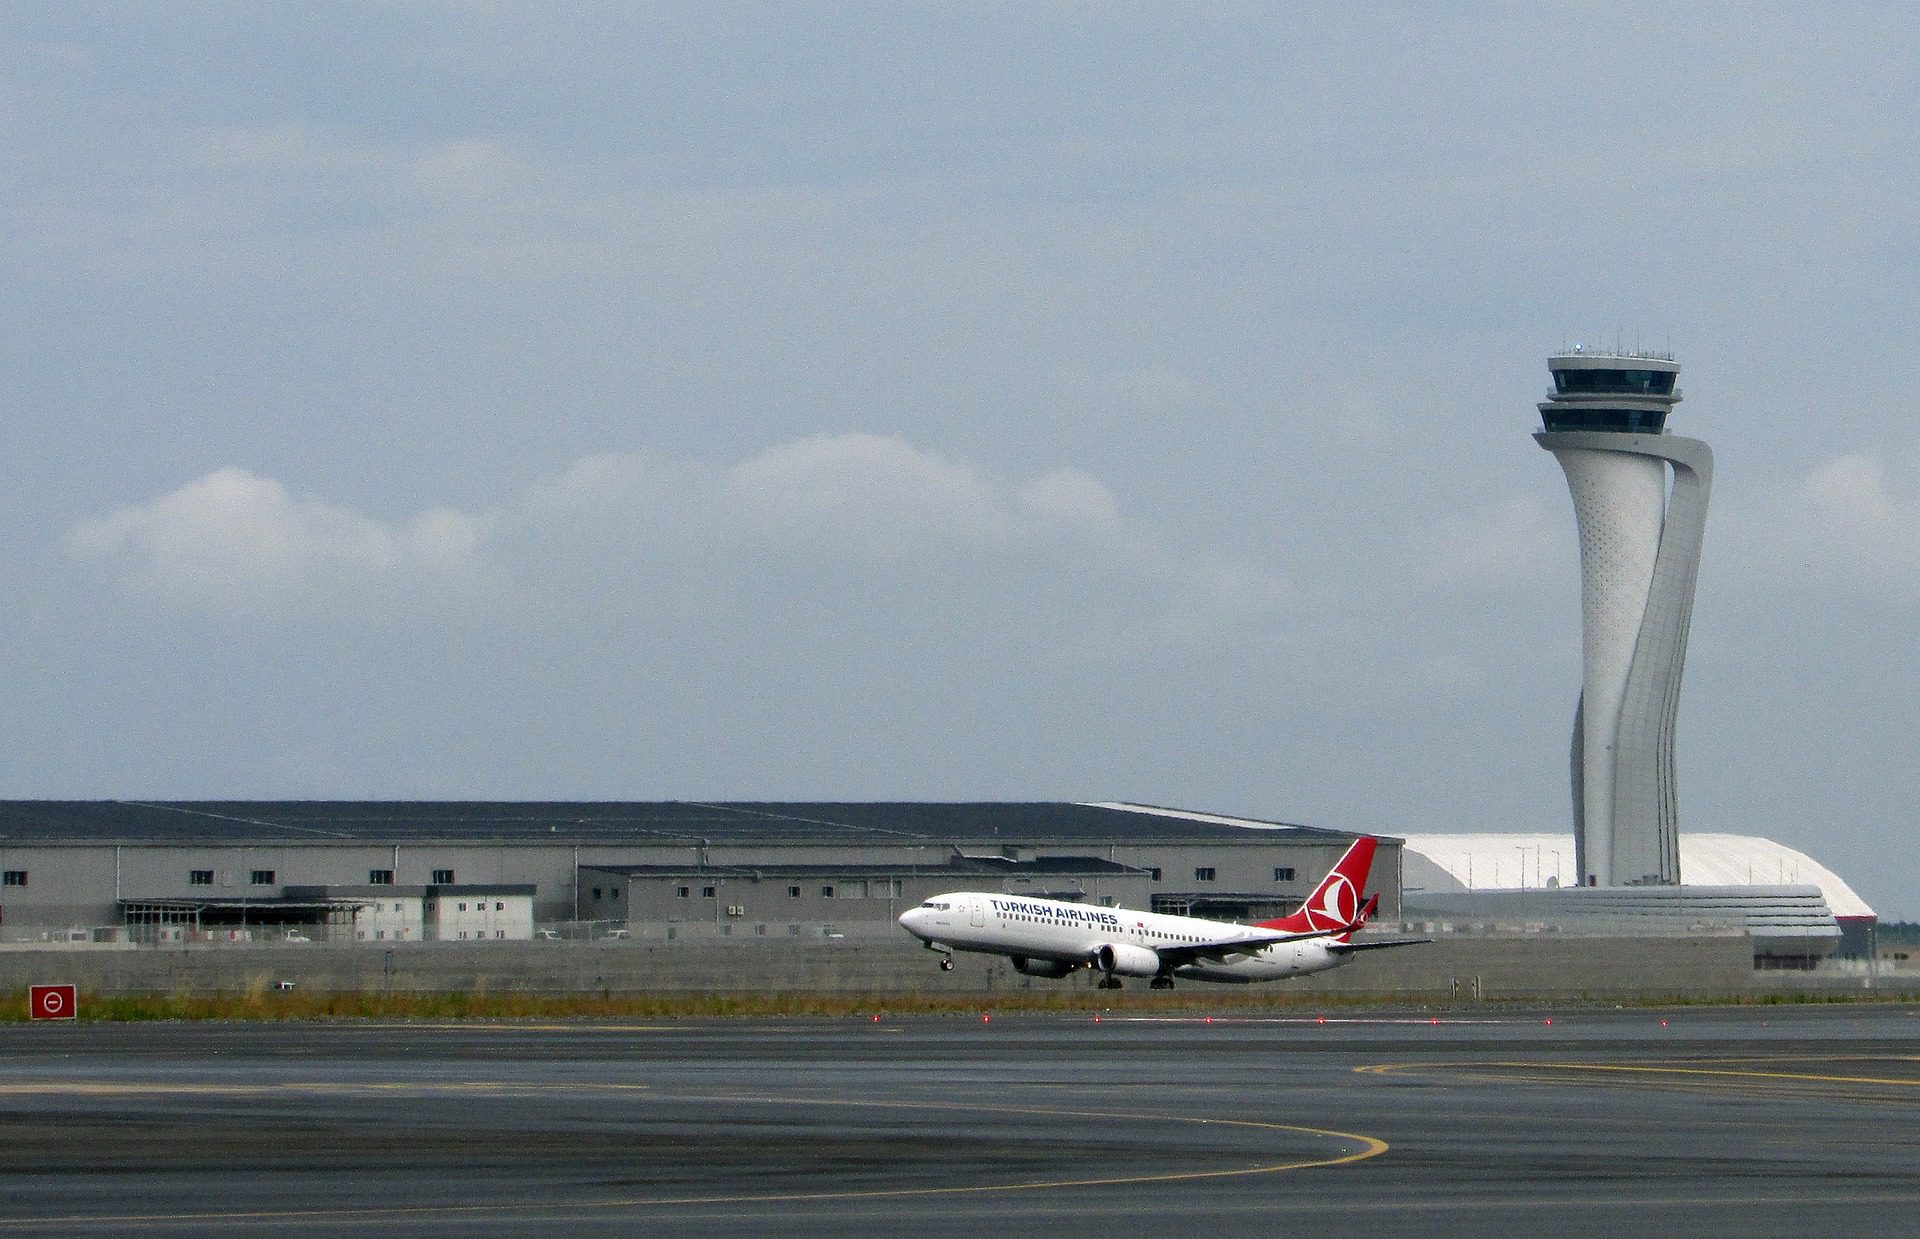 Passenger traffic at Istanbul airports up by 22 million in 2021